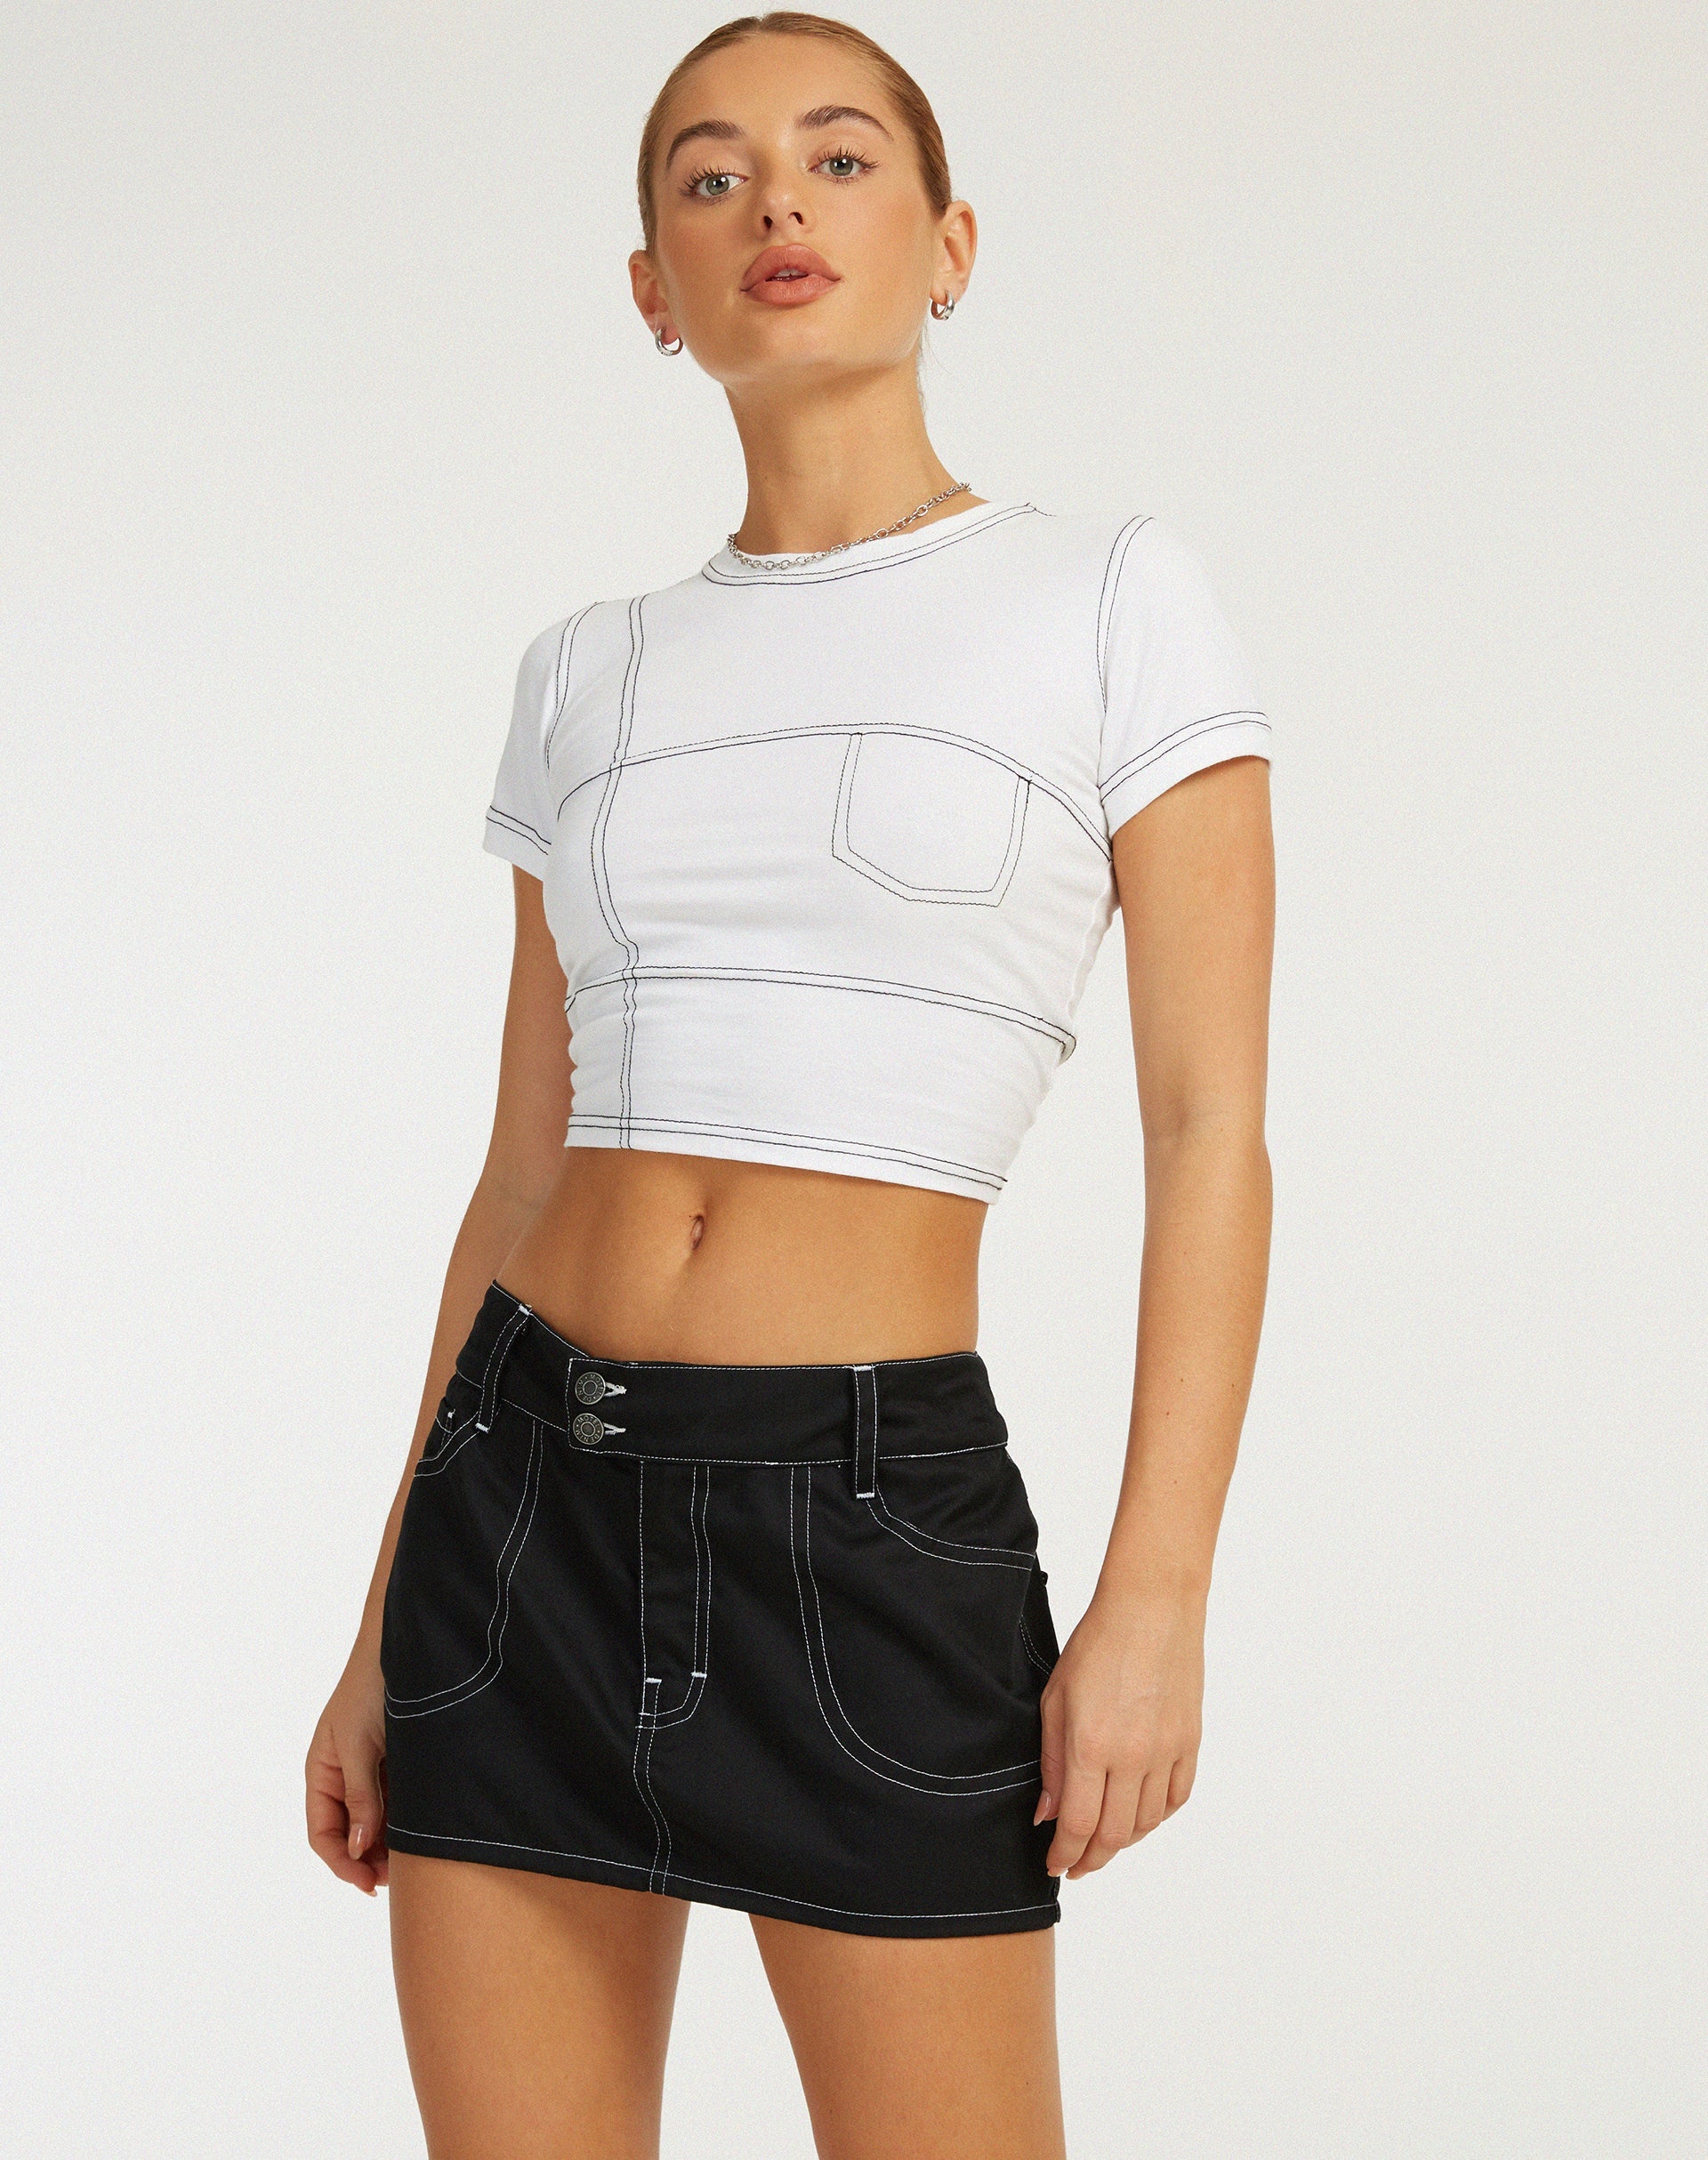 image of Shyla Cropped Tee in White with Black Stitch